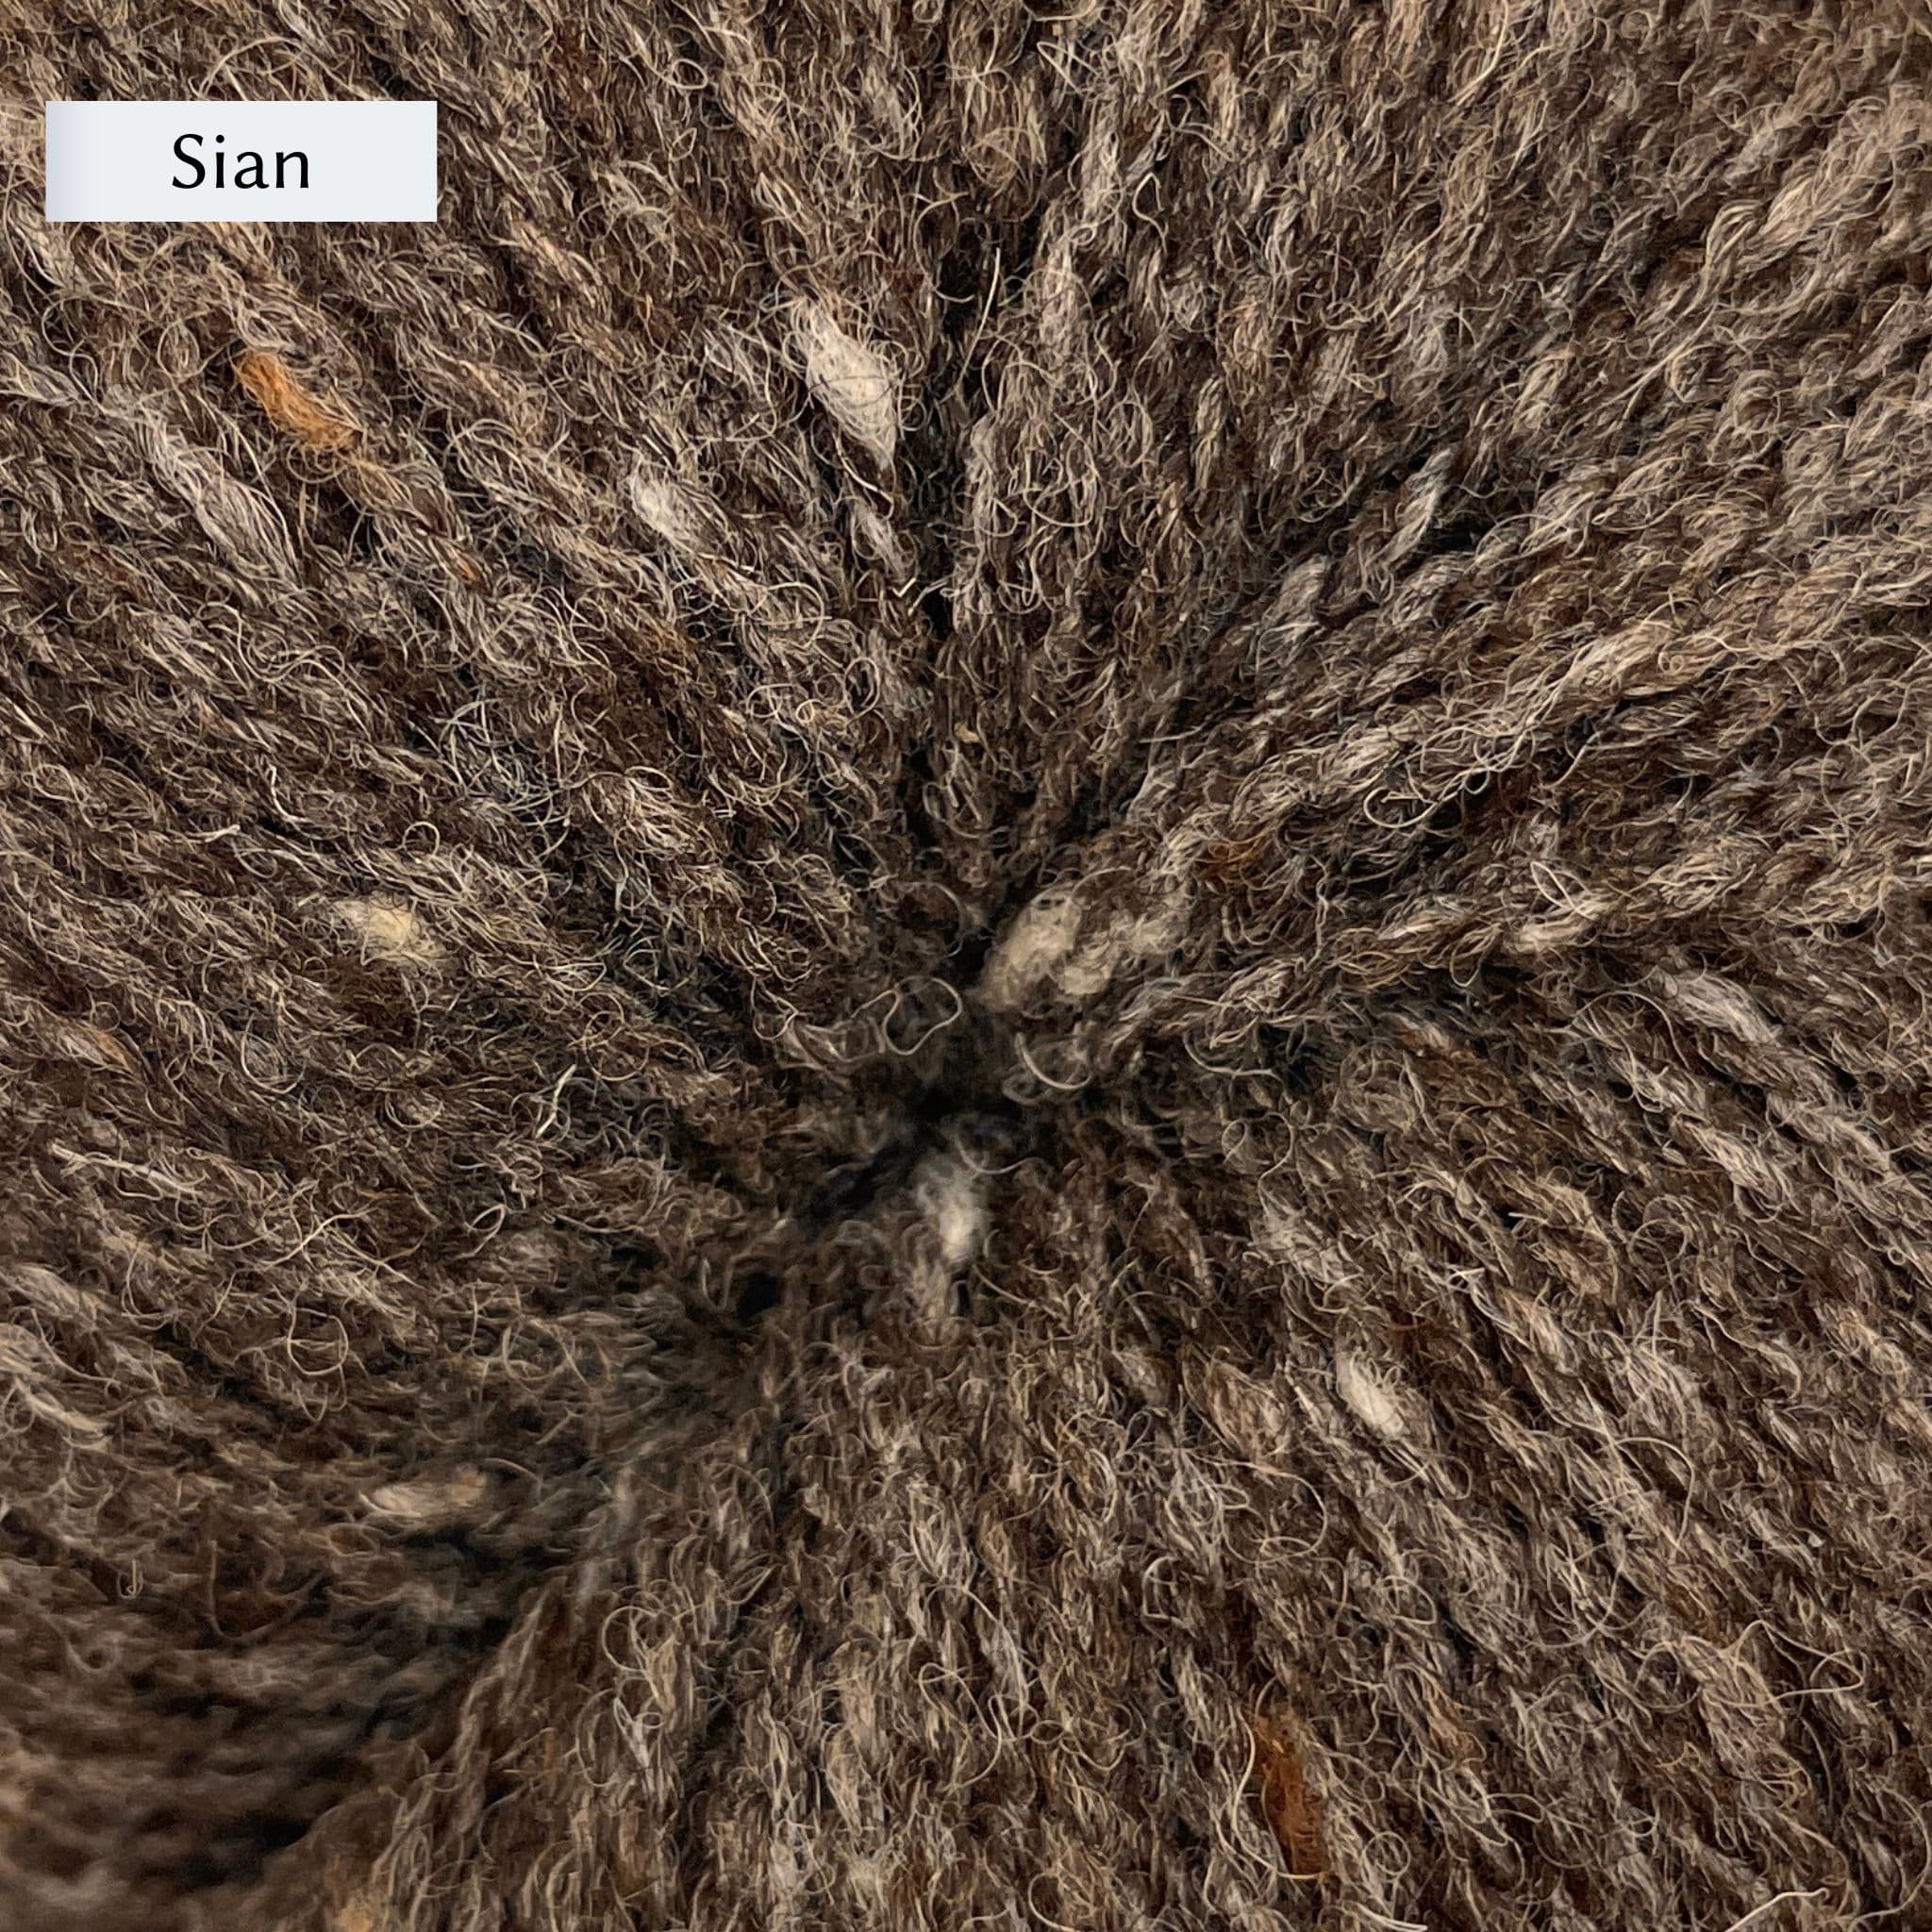 Uist Wool Yarn DK weight in Sian, a brown grey color.